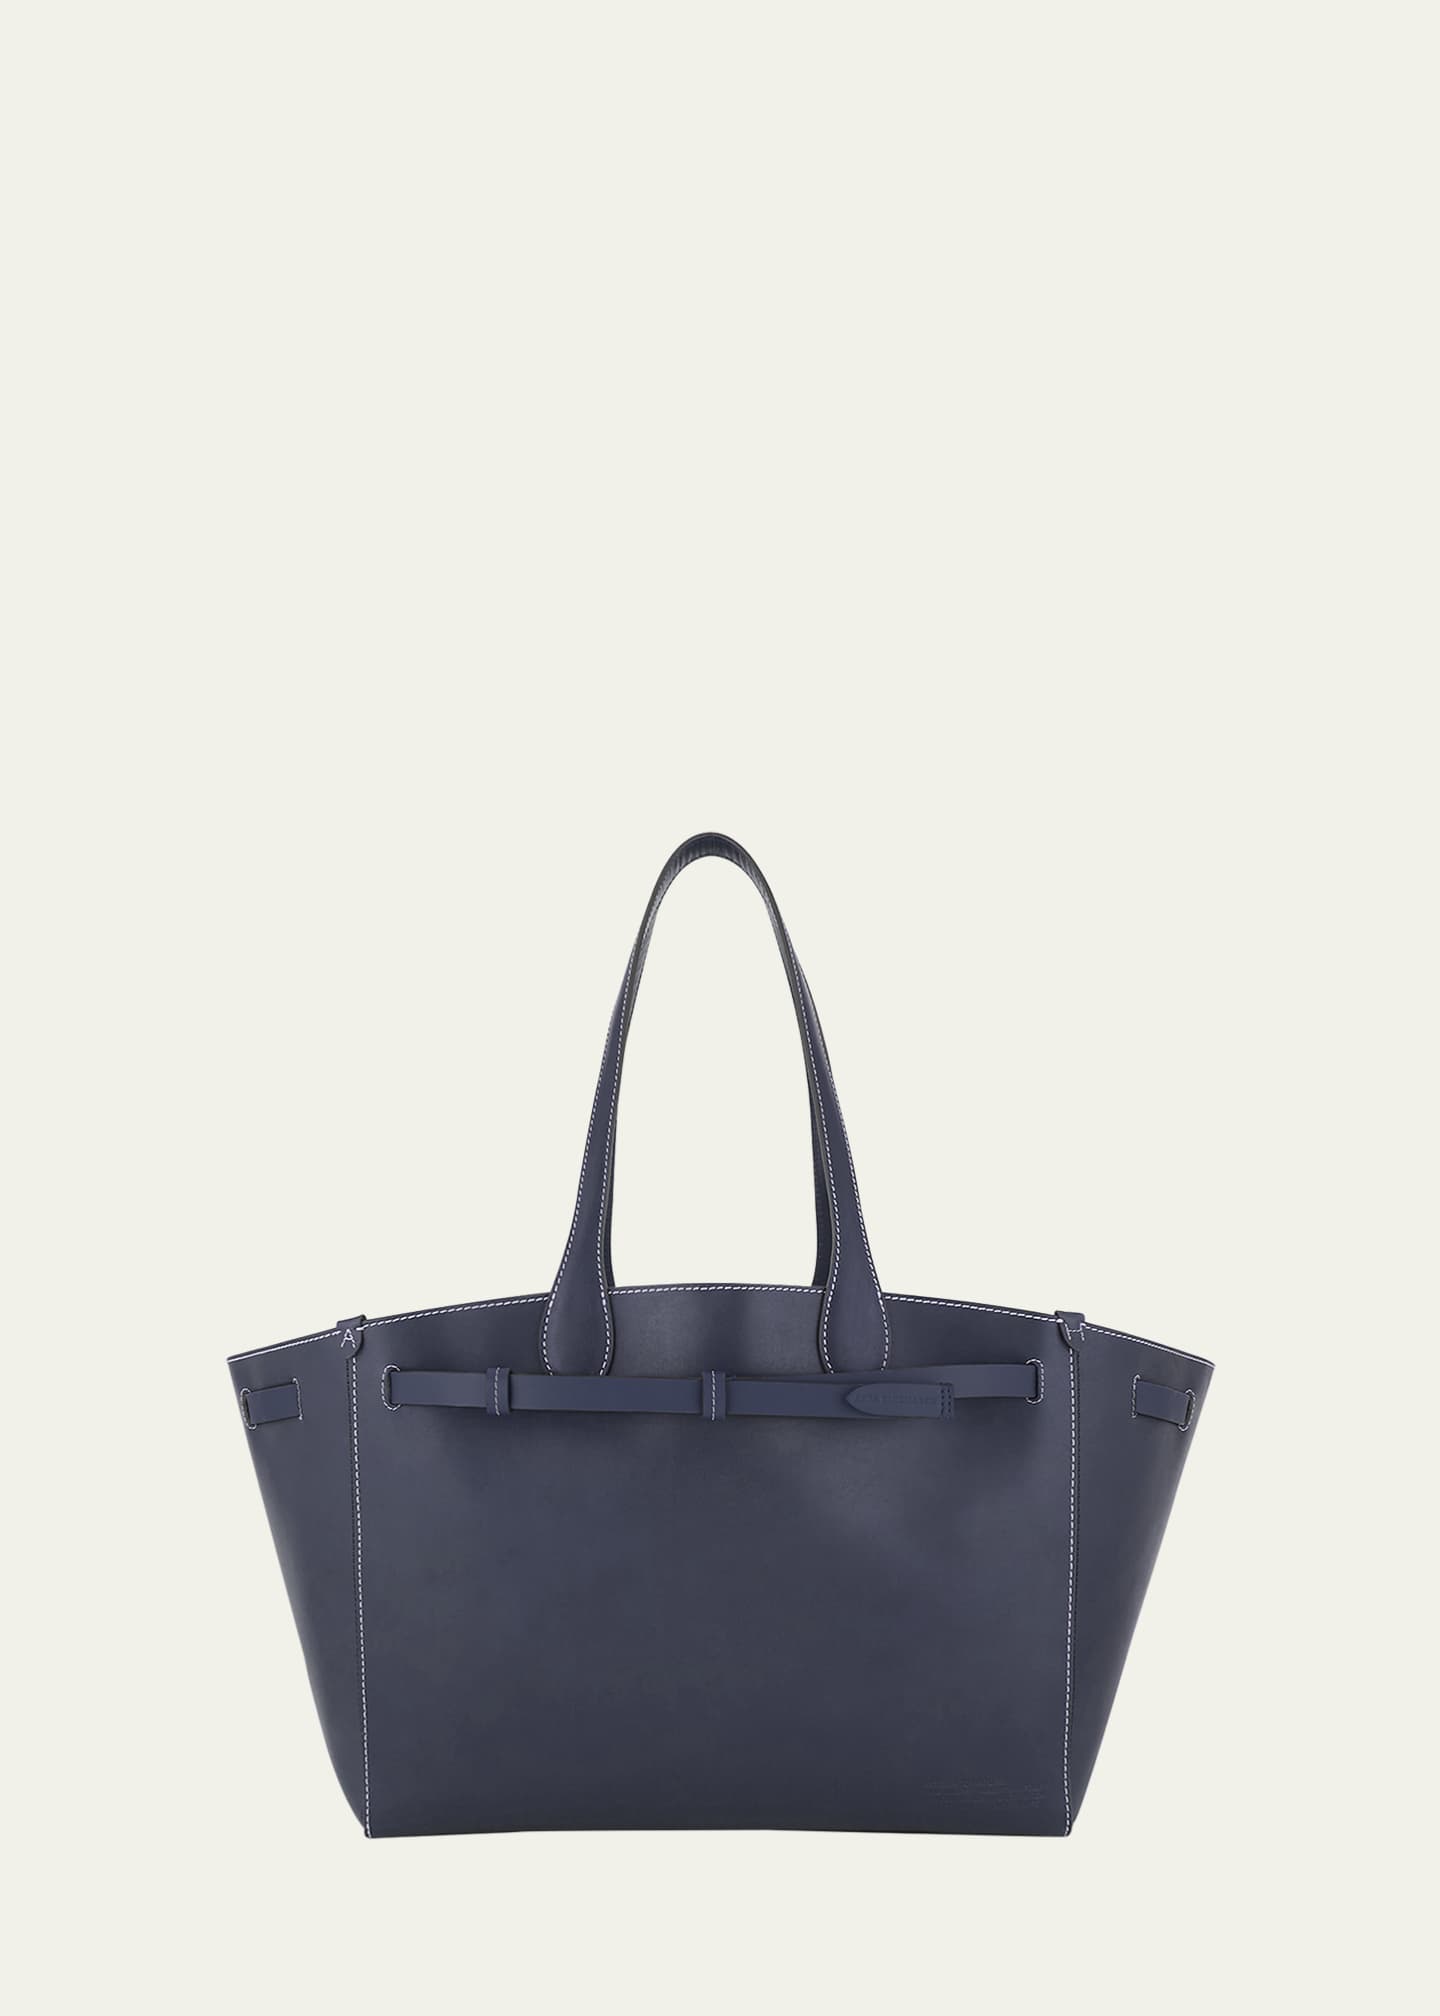 Anya Hindmarch Return to Nature Compostable Leather Tote Bag - Bergdorf ...